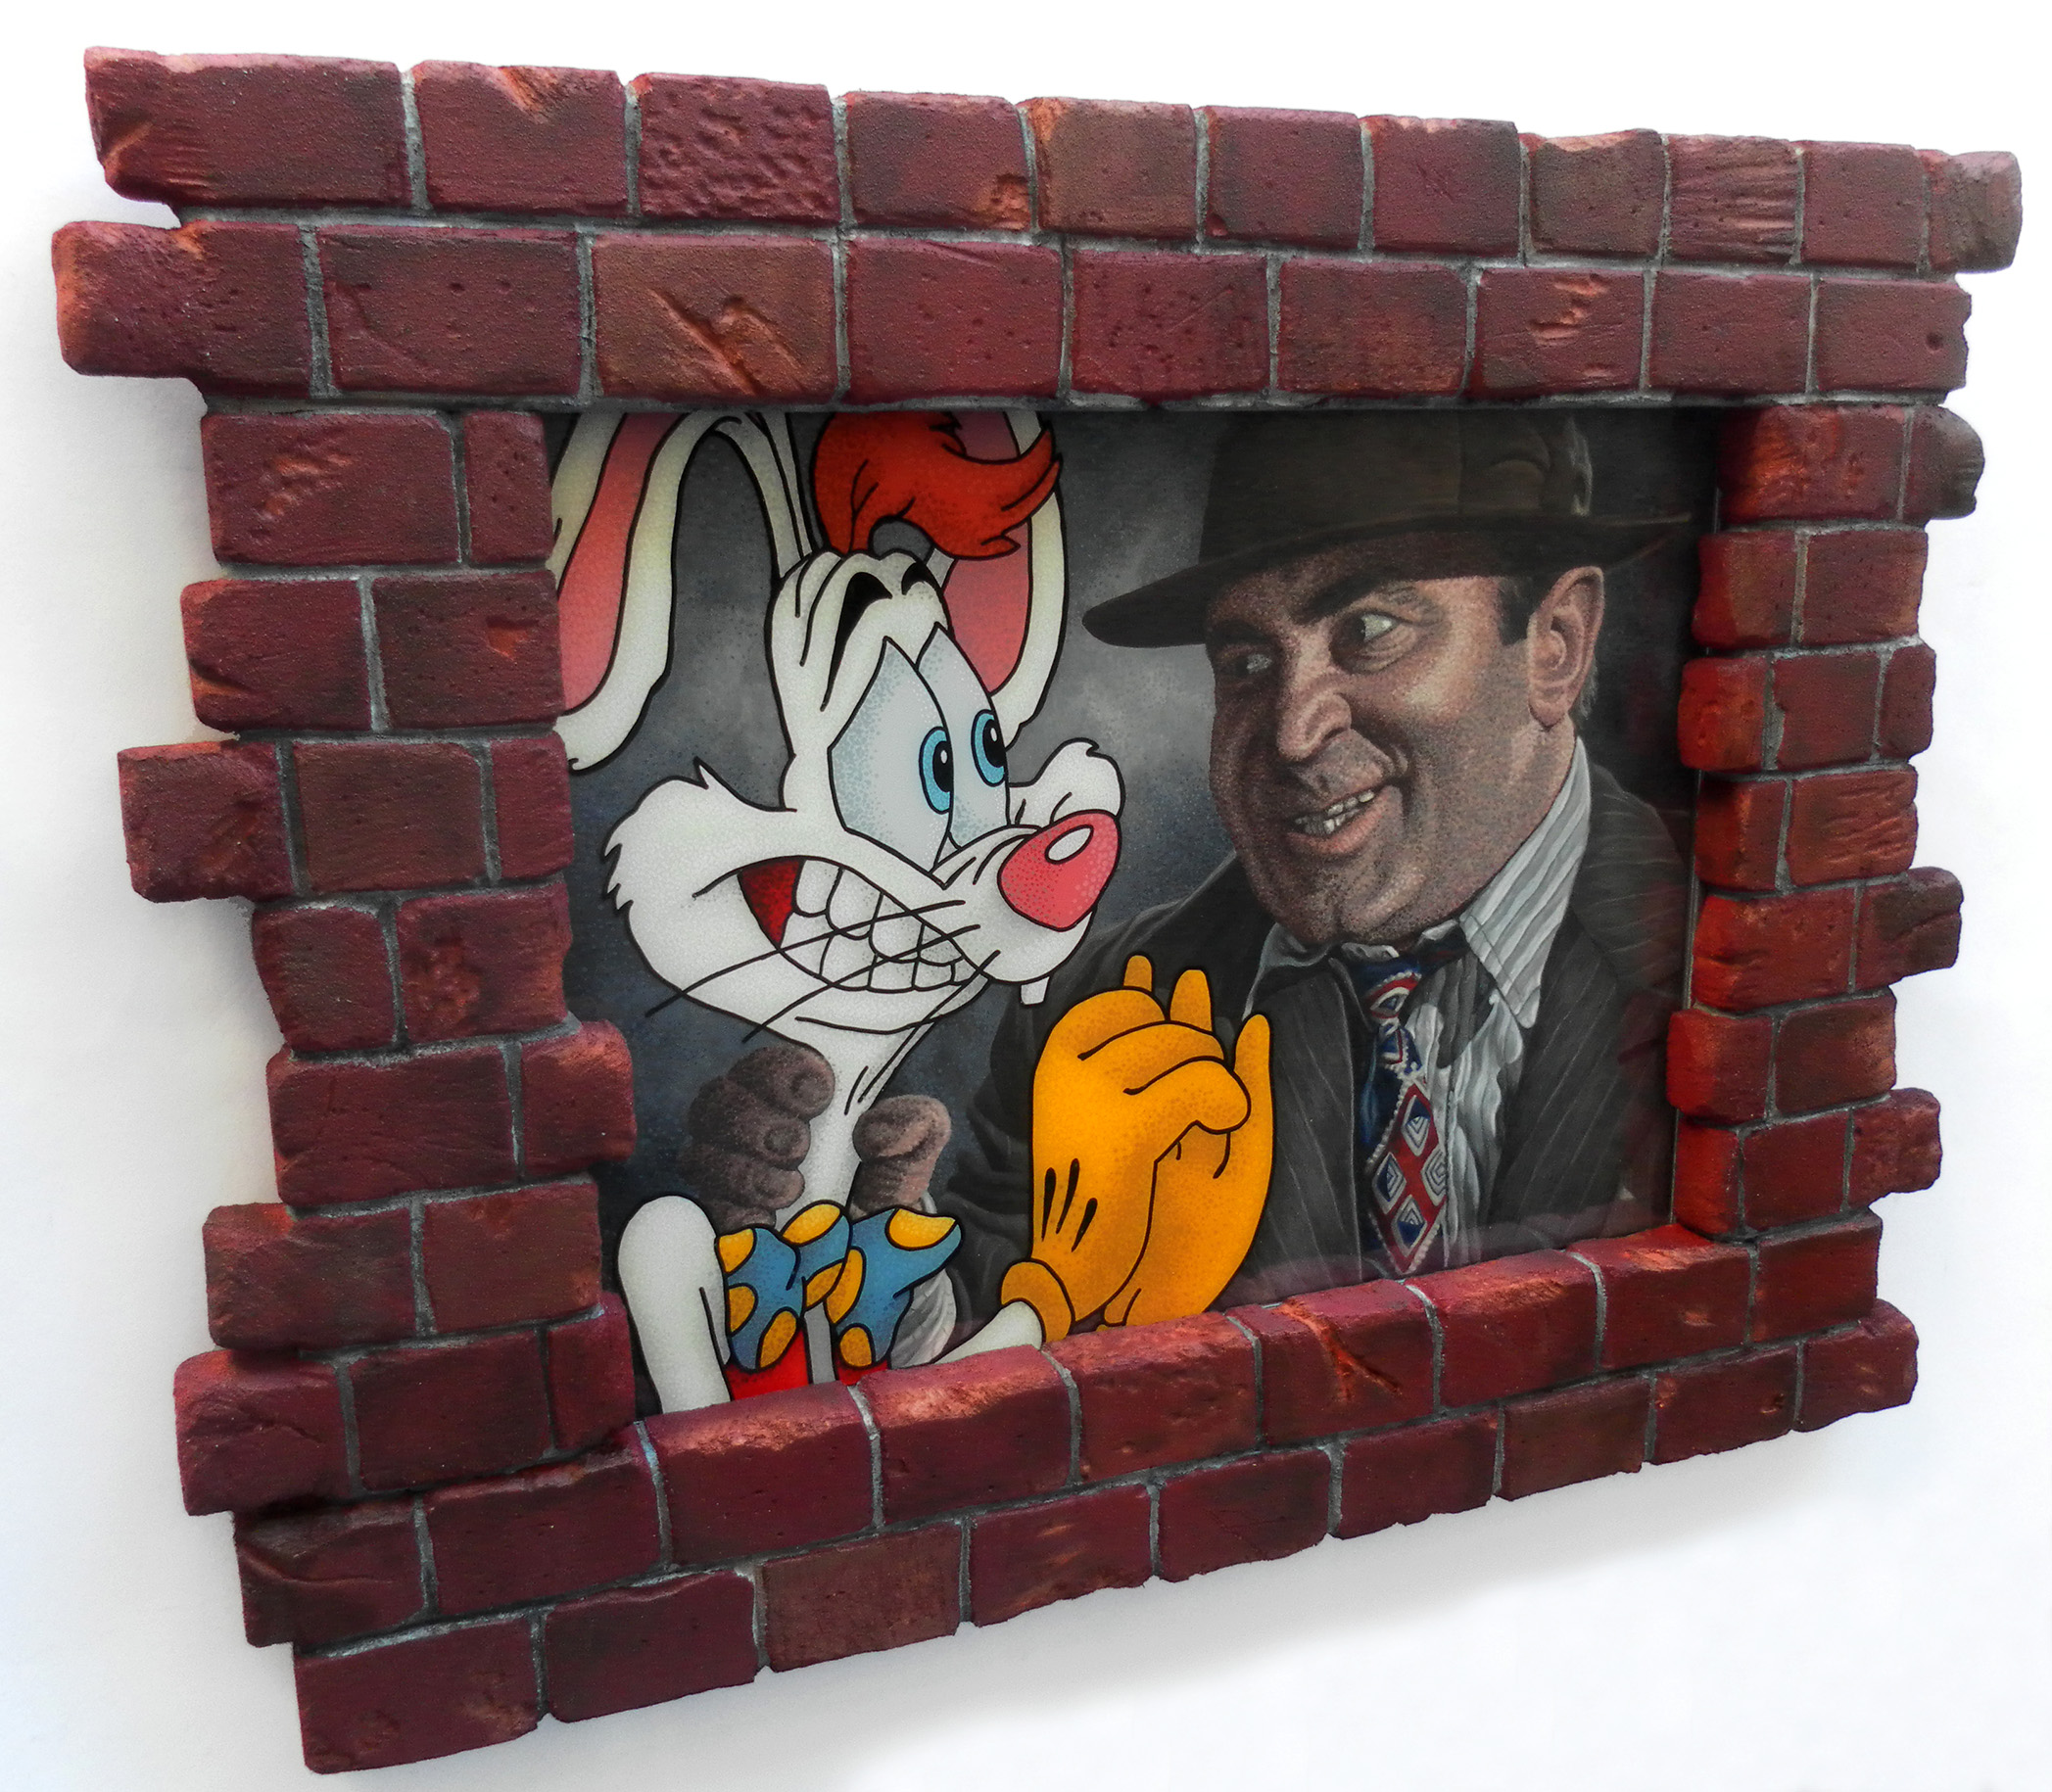 Roger Rabbit and Bob Hoskins in Who Framed Roger Rabbit? (The answer in this case? JoKa.) (Photo: Gallery 1988/JoKa)